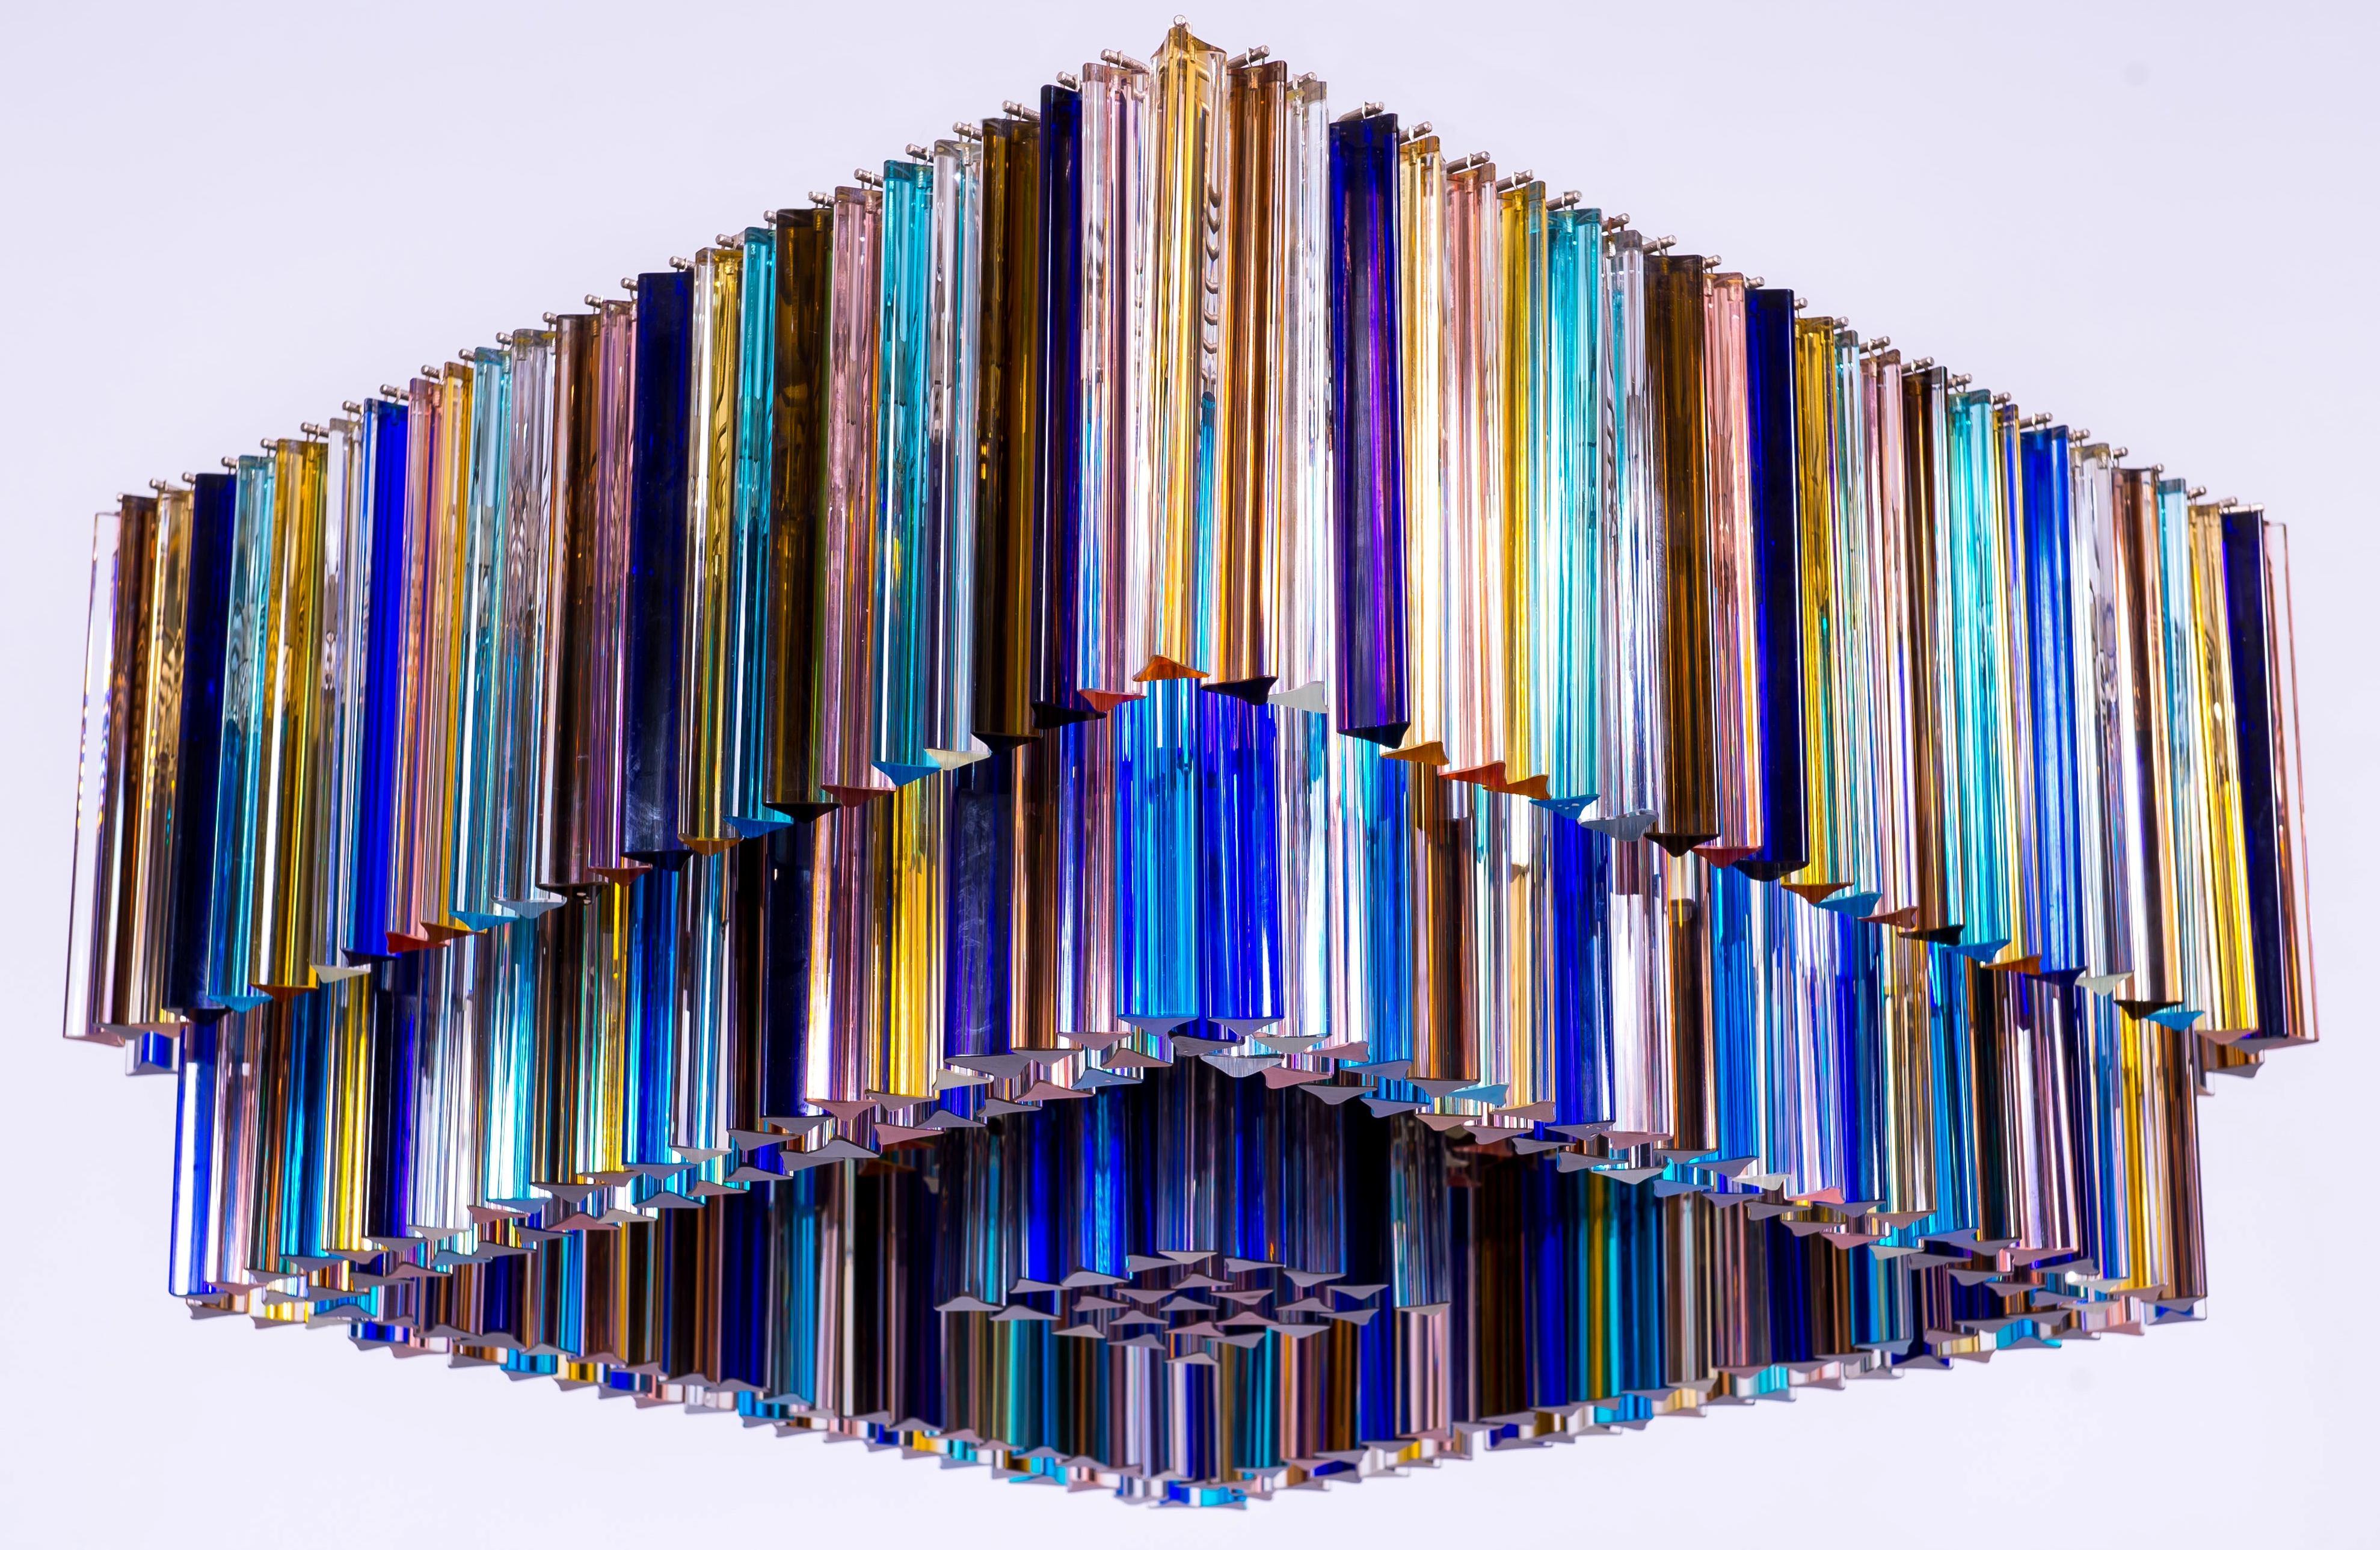 Italian Flush Mount in Murano Glass Multi color Elements by Giovanni Dalla Fina
This outstanding massive Murano glass flush mount celebrates the beauty of colors and the perfection of geometrical shapes. A total of 489 multicolored ”triedro”